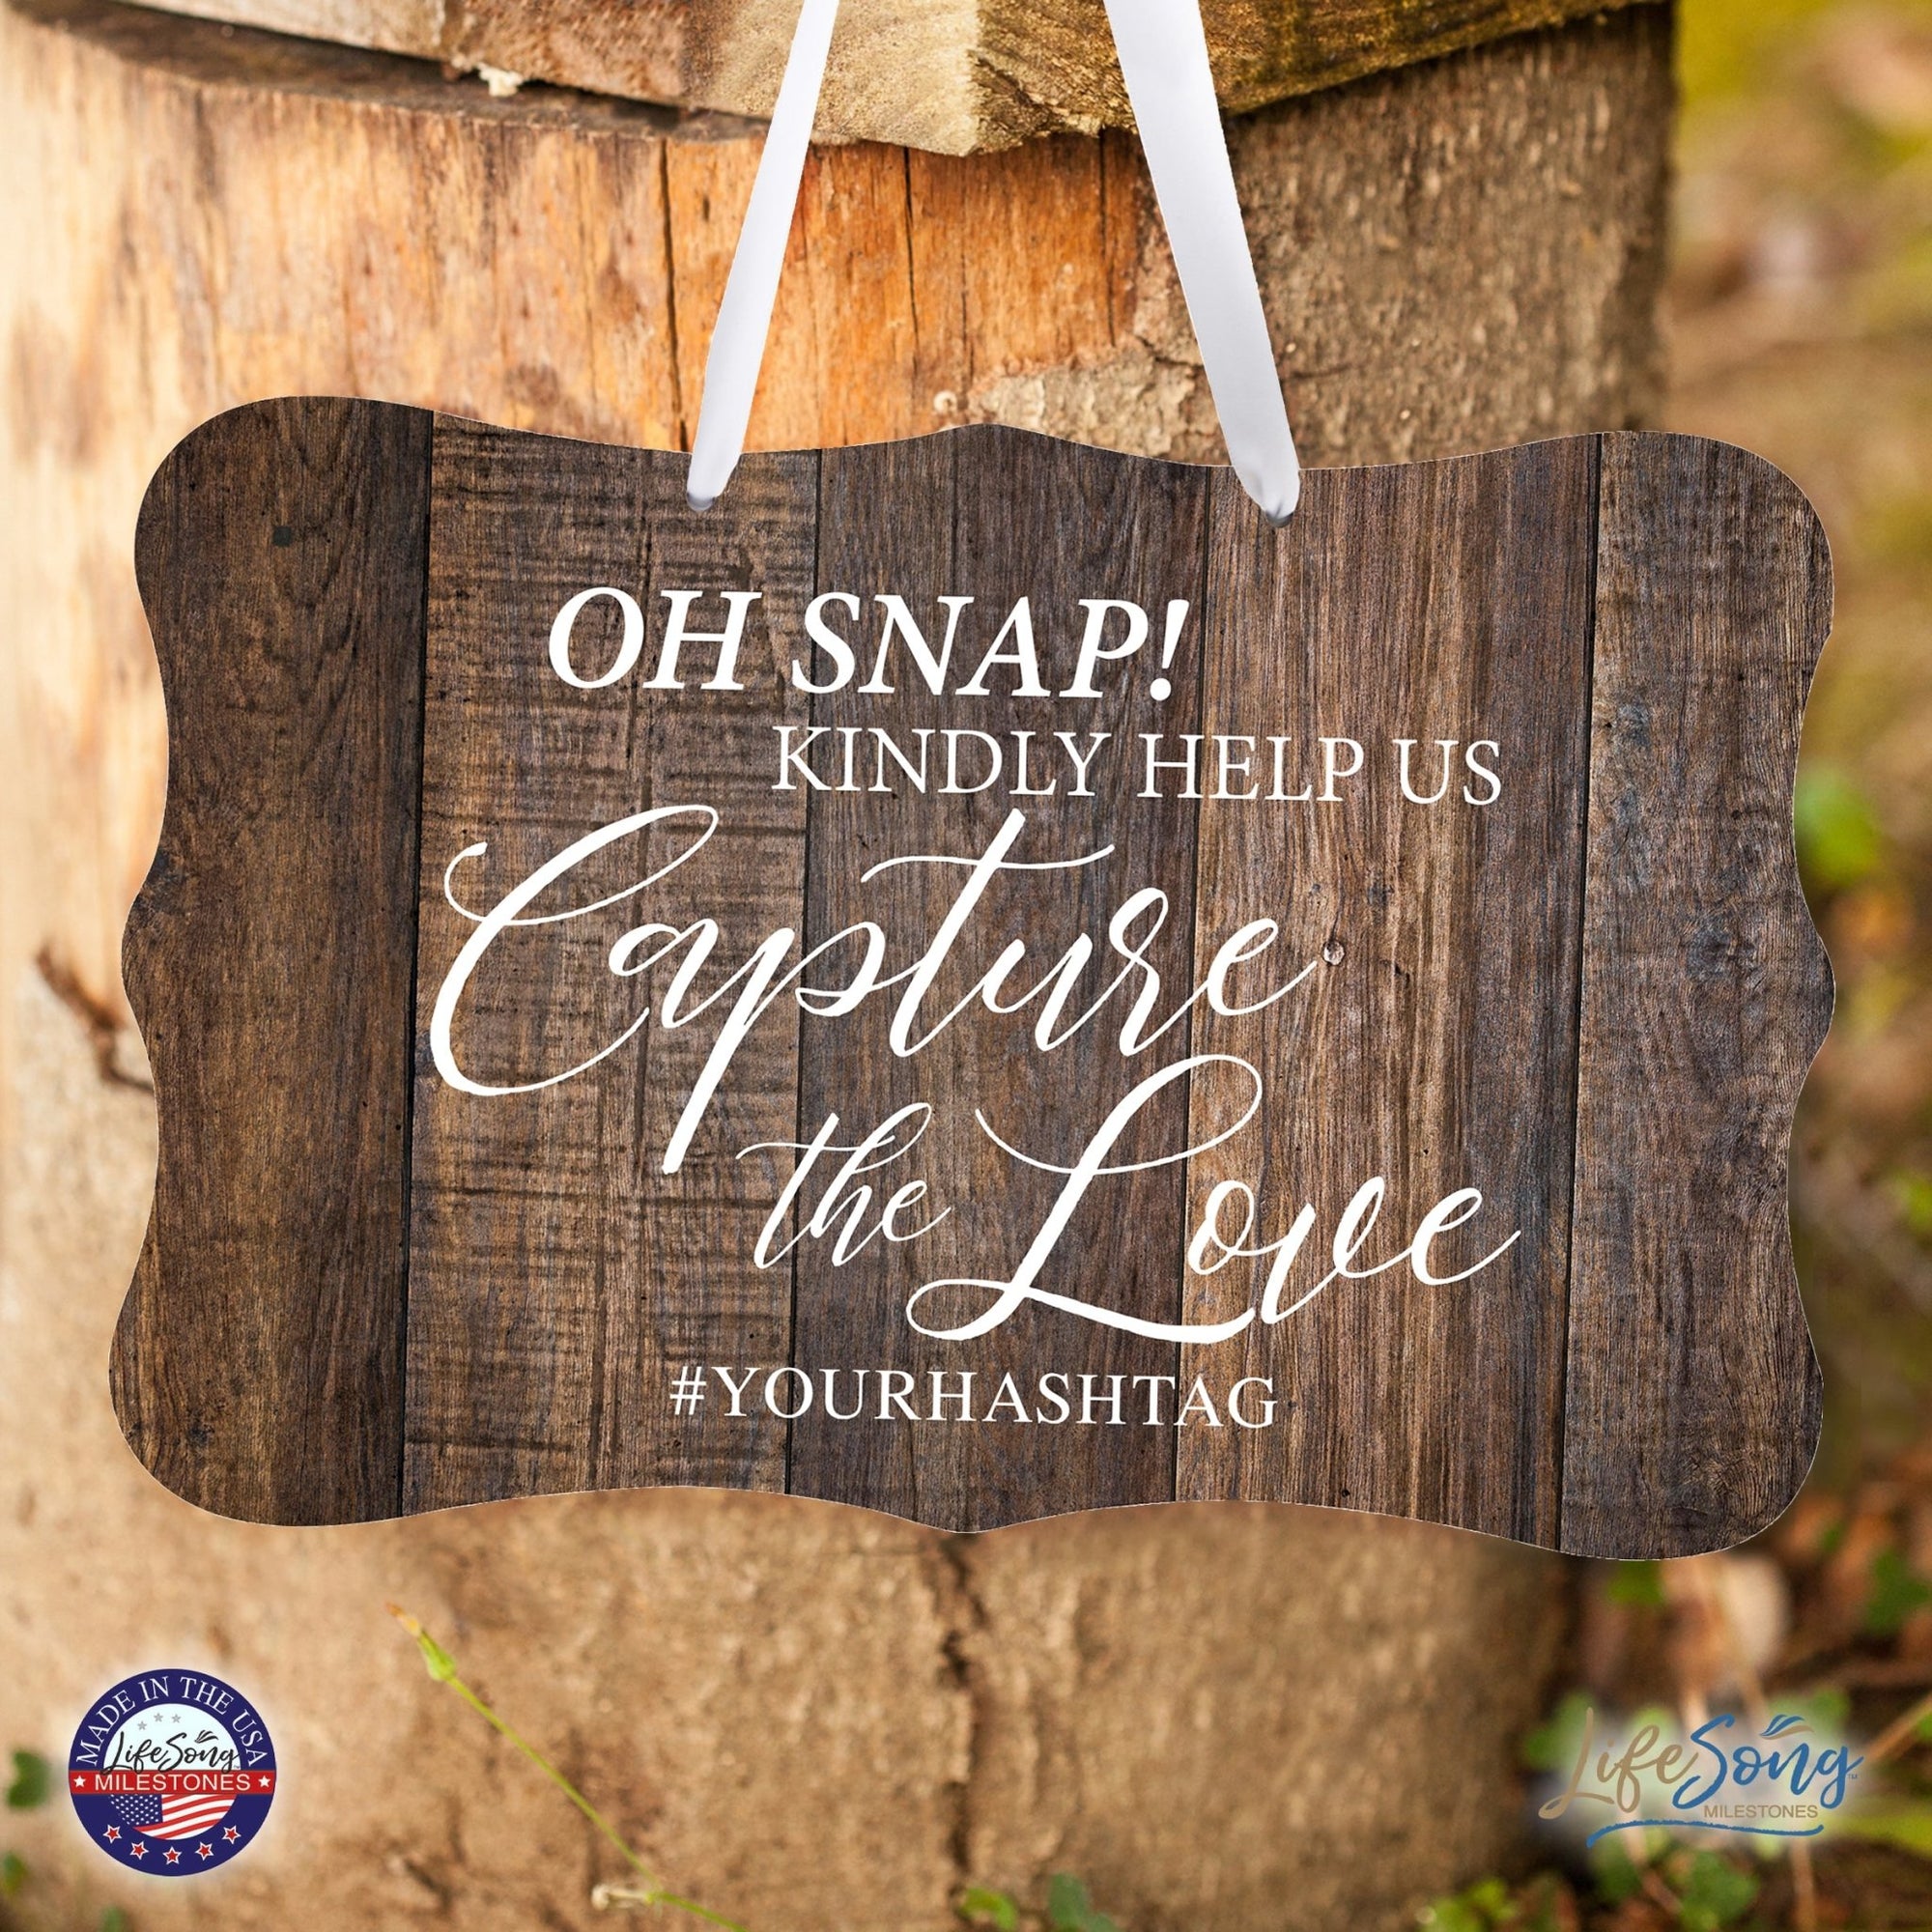 Custom Wedding Wall Hanging Signs For Ceremony And Reception For Couple - Oh, Snap! - LifeSong Milestones